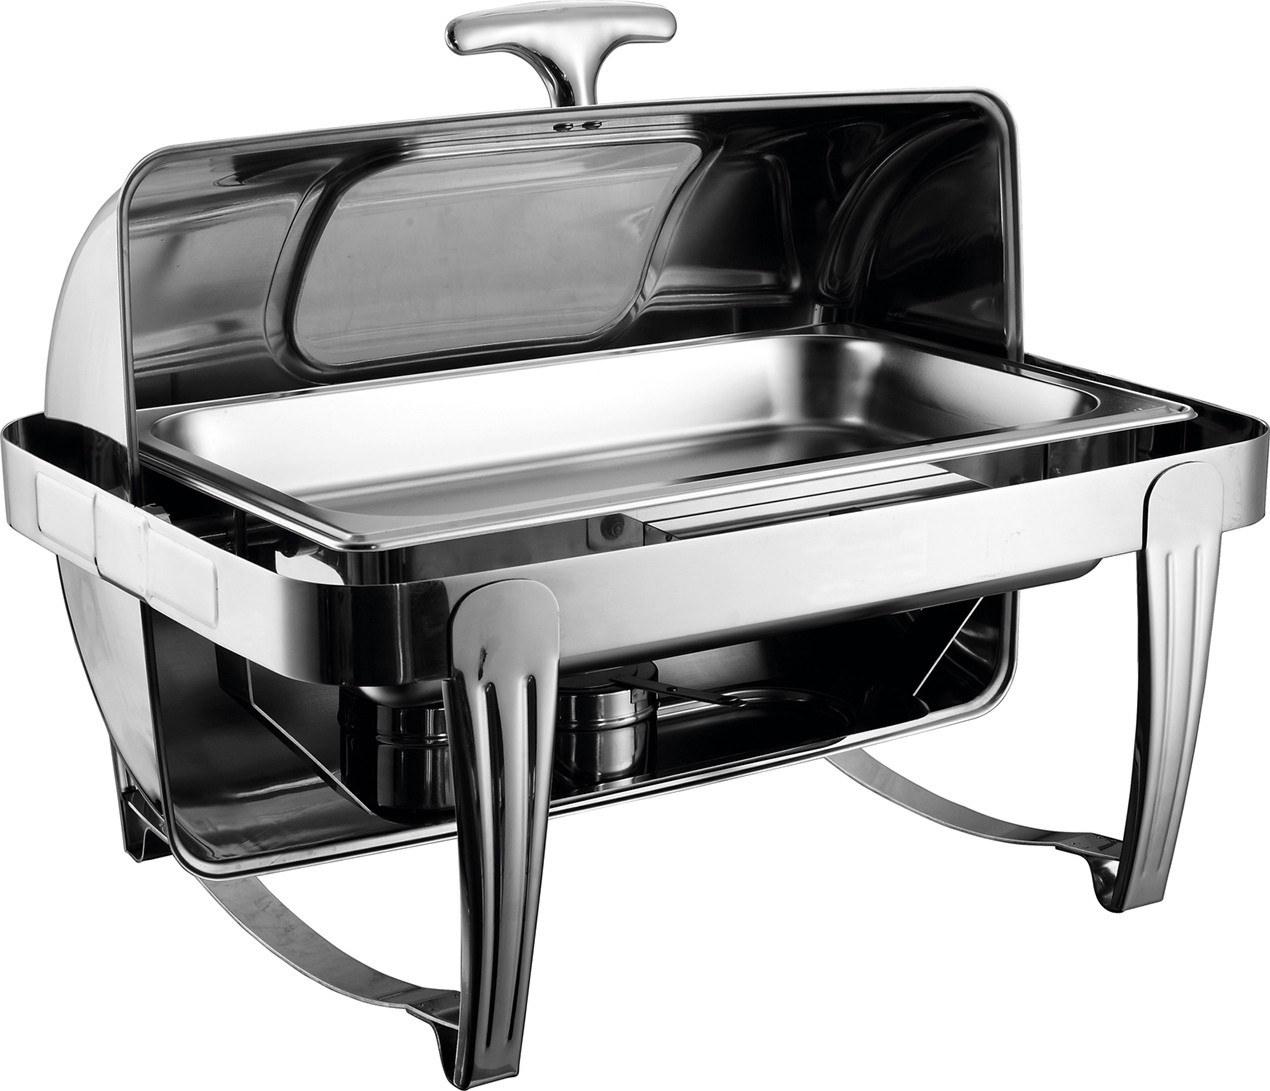 GRT-723BKS Visible Window Cheap Chafing Dish For Sale